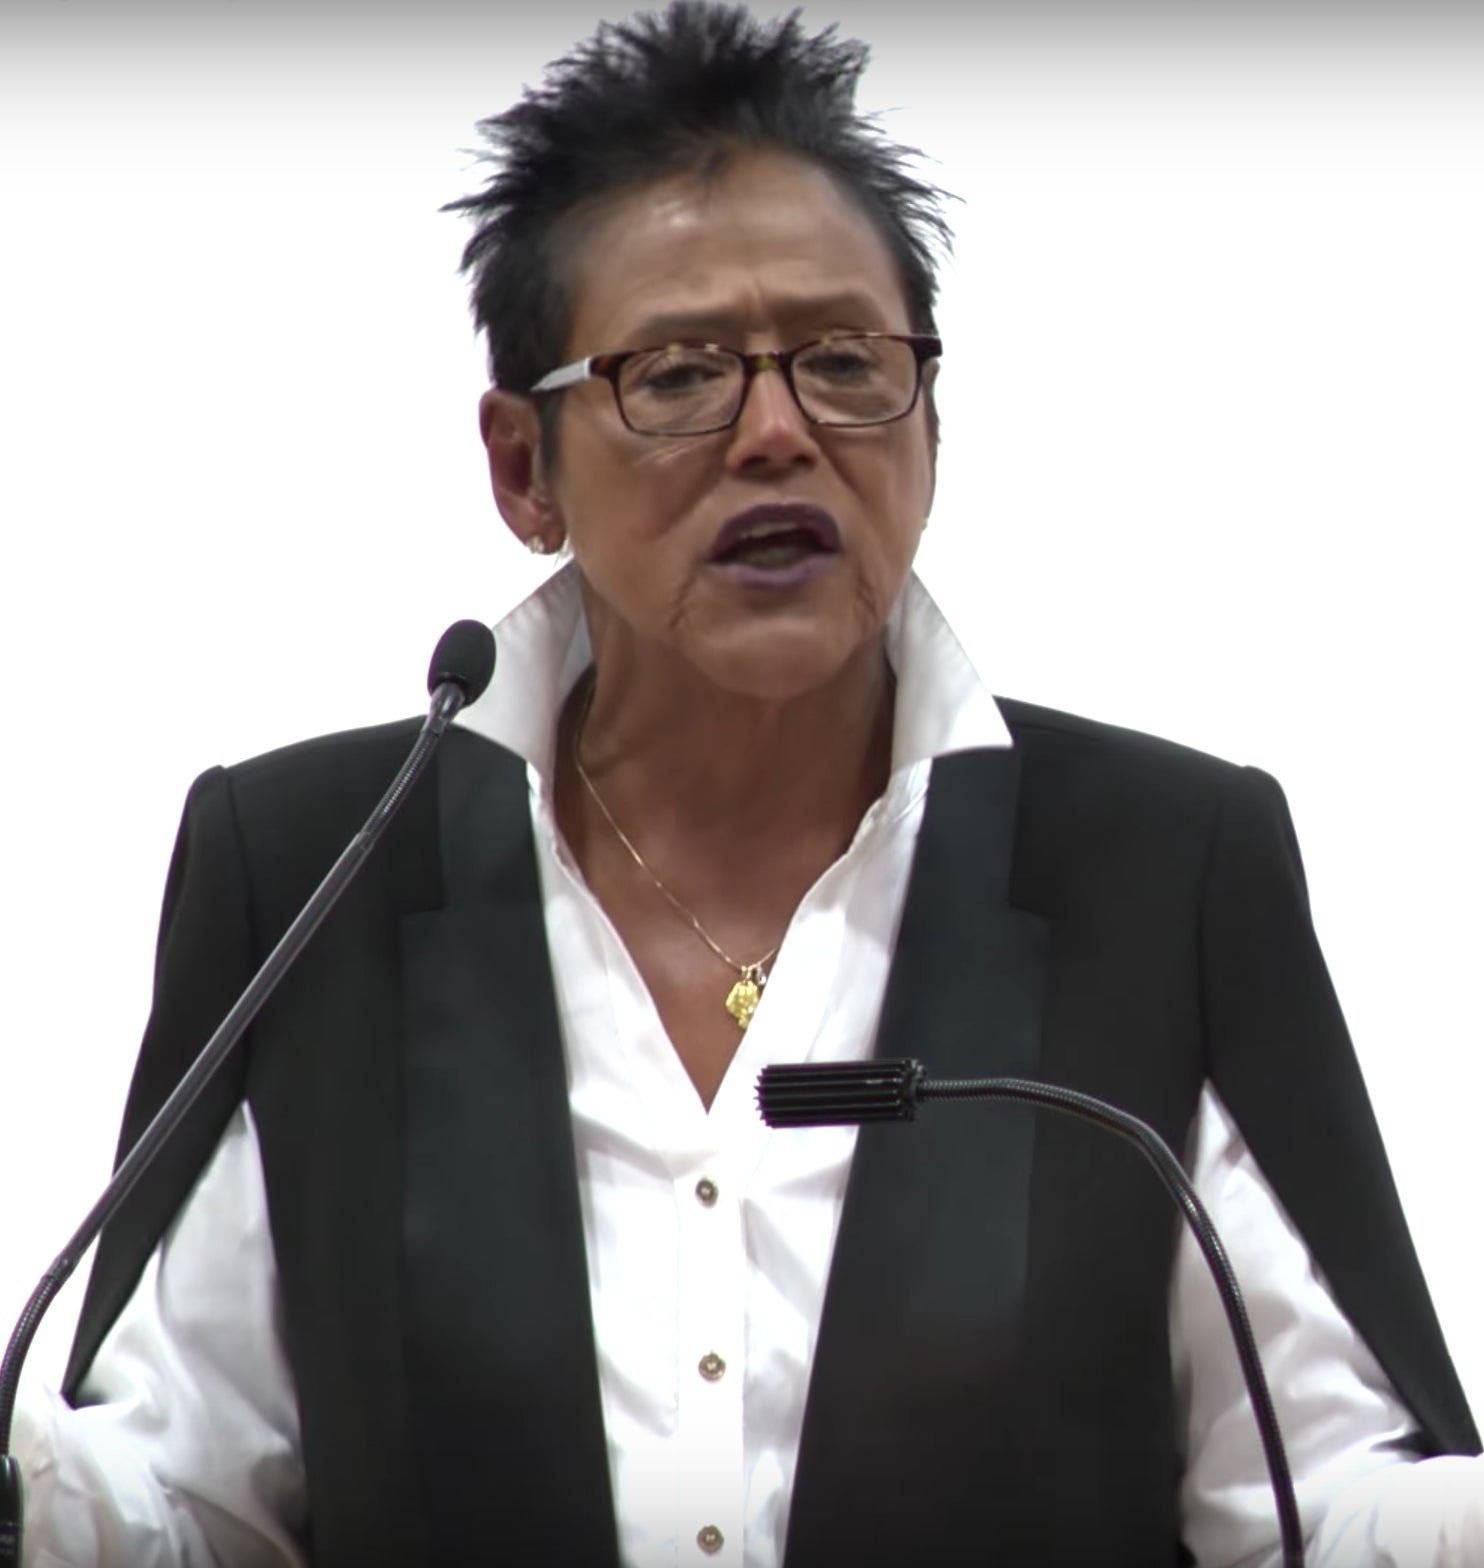 Former Black Panther Elaine Brown Awarded $3.7 Million In Assault Lawsuit Against Oakland Councilwoman